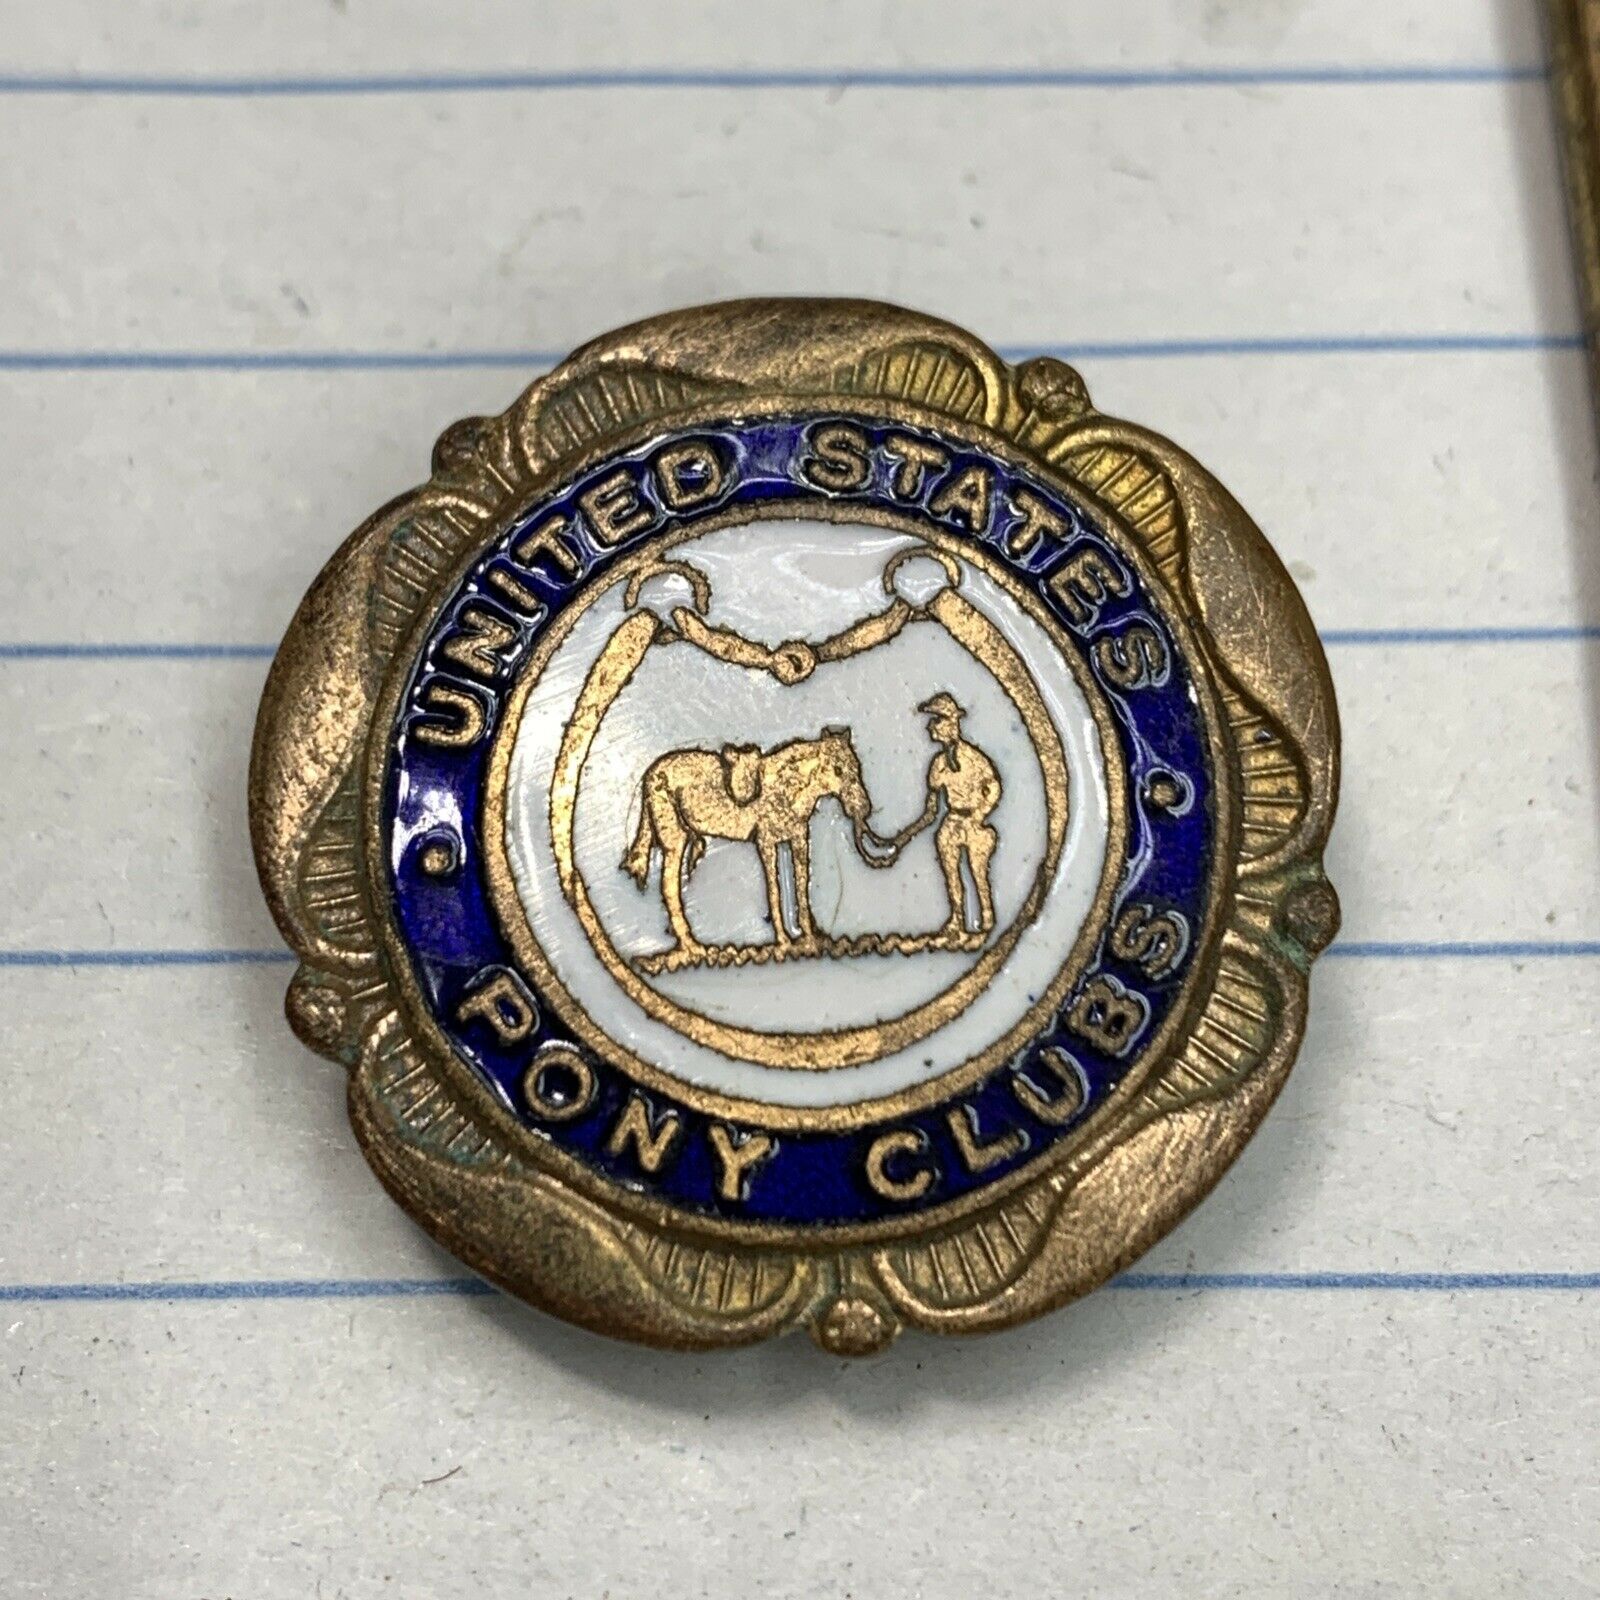 Equestrian Pin United States Pony Clubs Vintage Wo Louis Badges England - 7.5.1